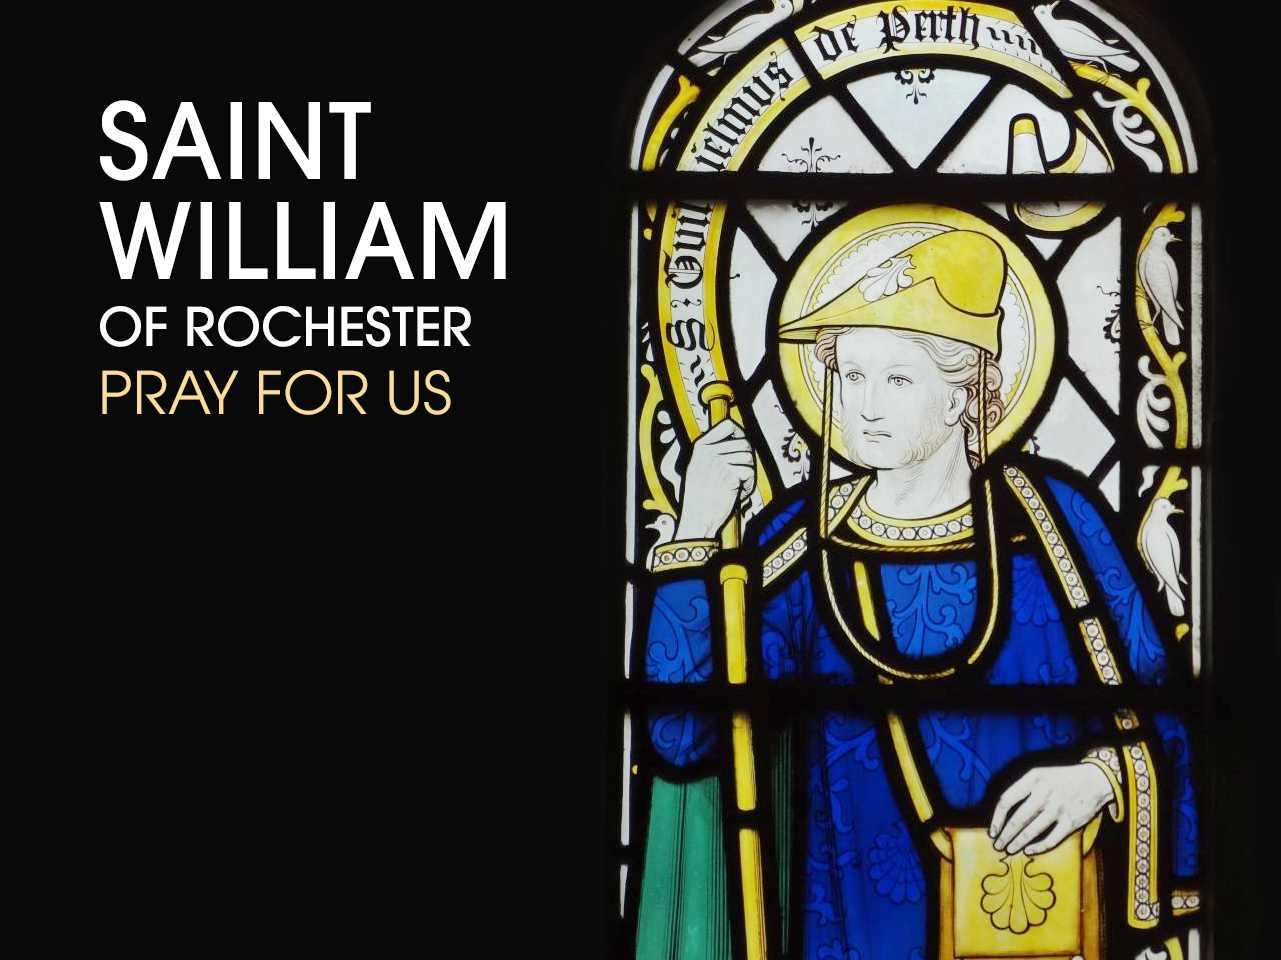 St. William of Rochester